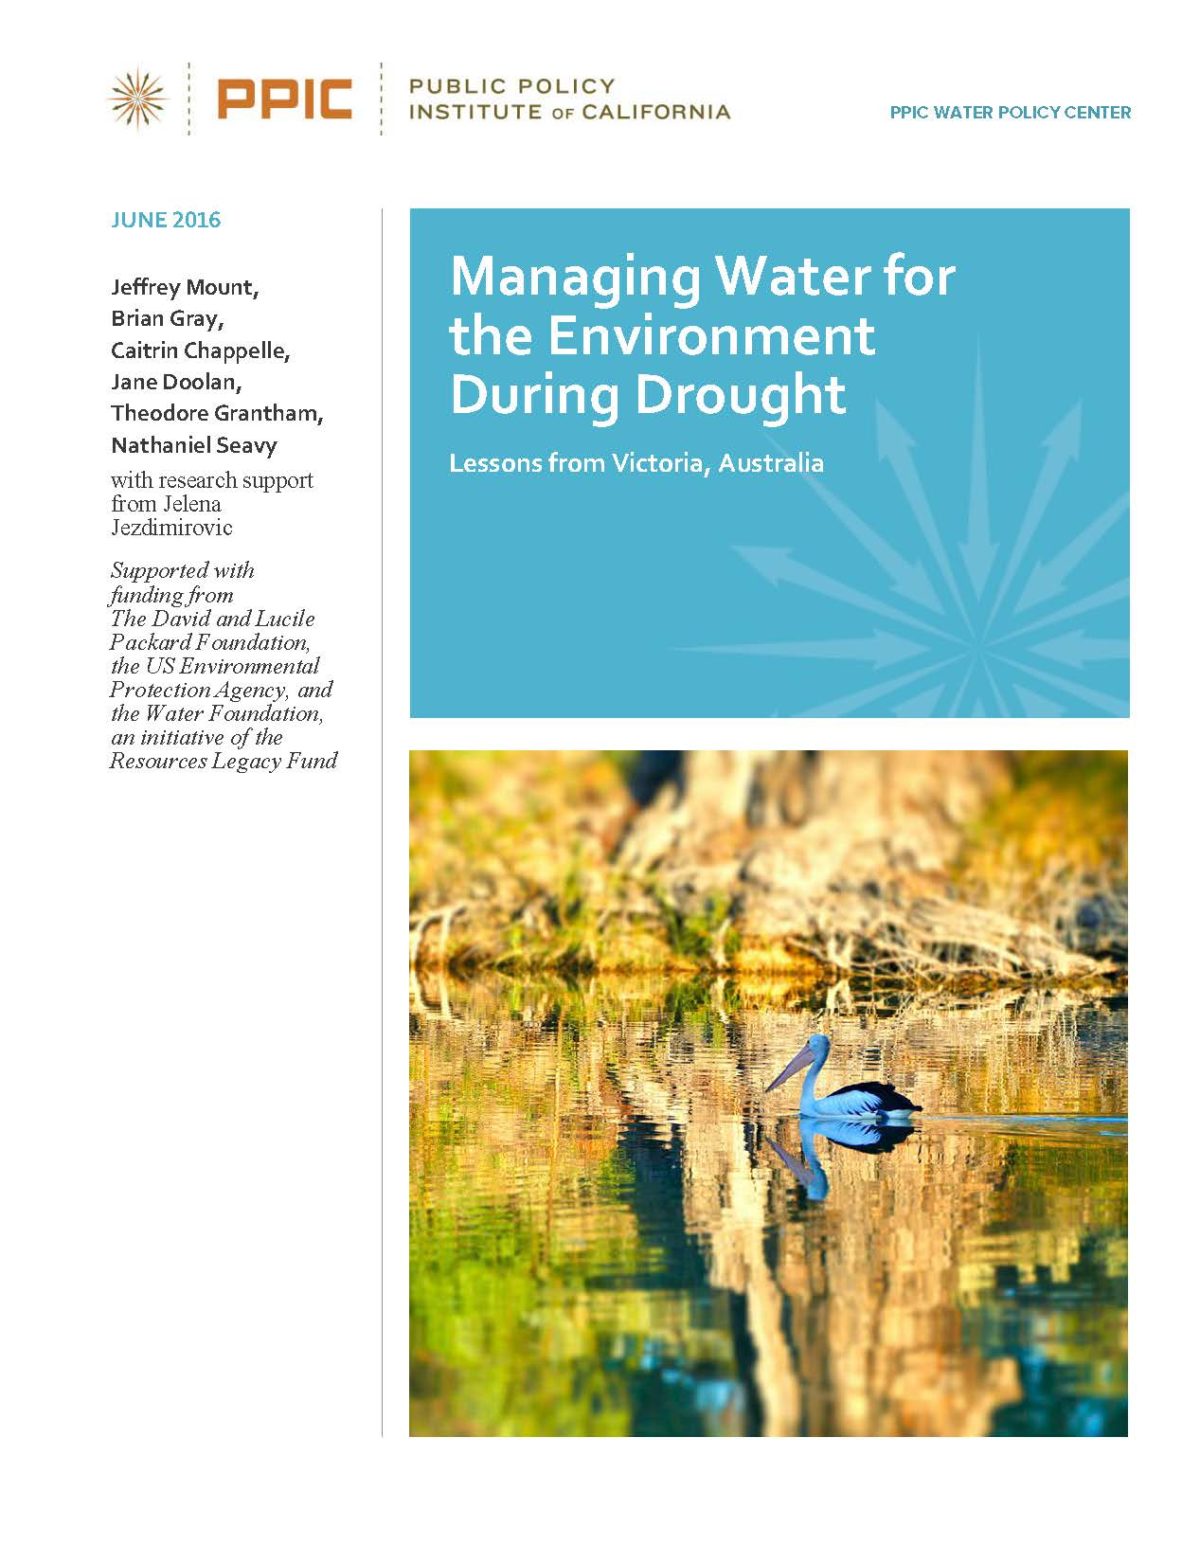 Managing Water for the Environment During Drought: Lessons from Victoria, Australia